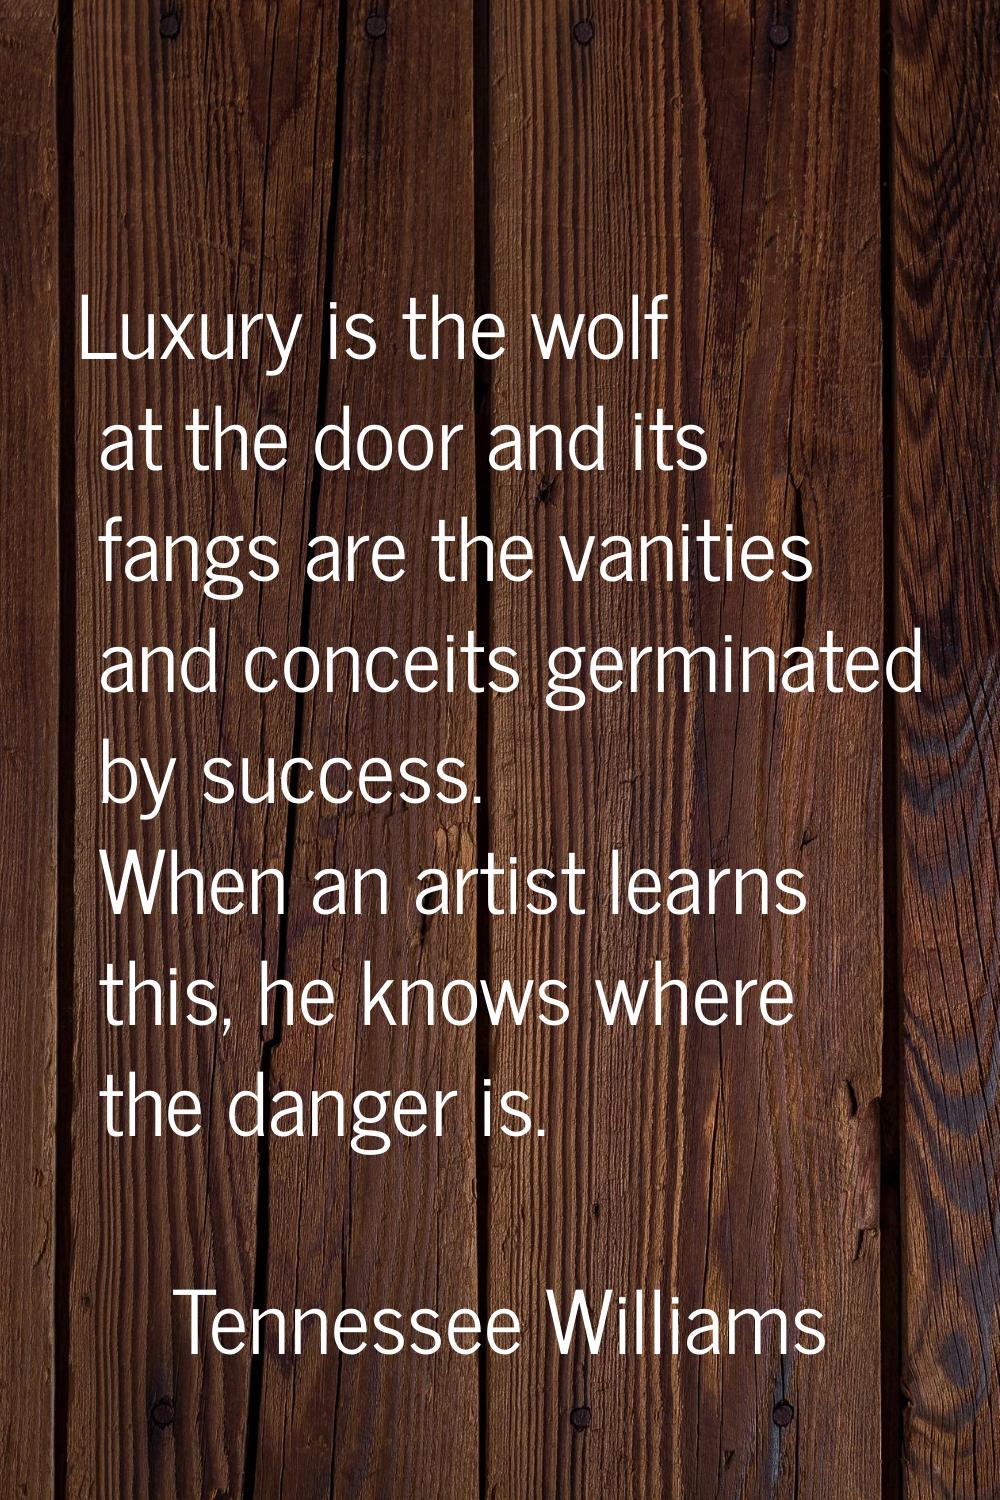 Luxury is the wolf at the door and its fangs are the vanities and conceits germinated by success. W